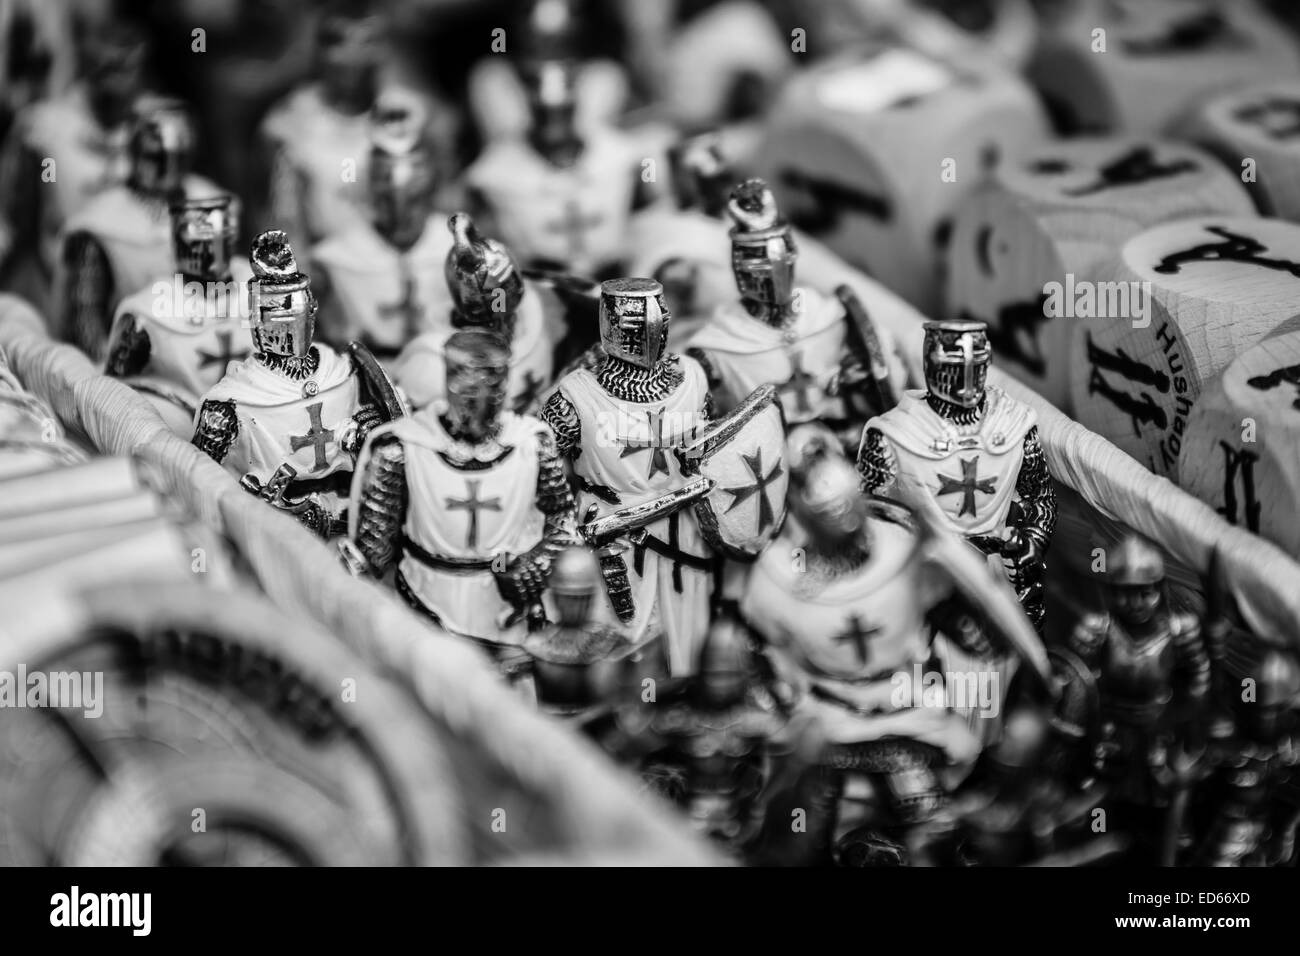 Prague souvenirs, tin soldiers (Crusaders). Black and white. Prague is the capital and largest city of the Czech Republic. Stock Photo